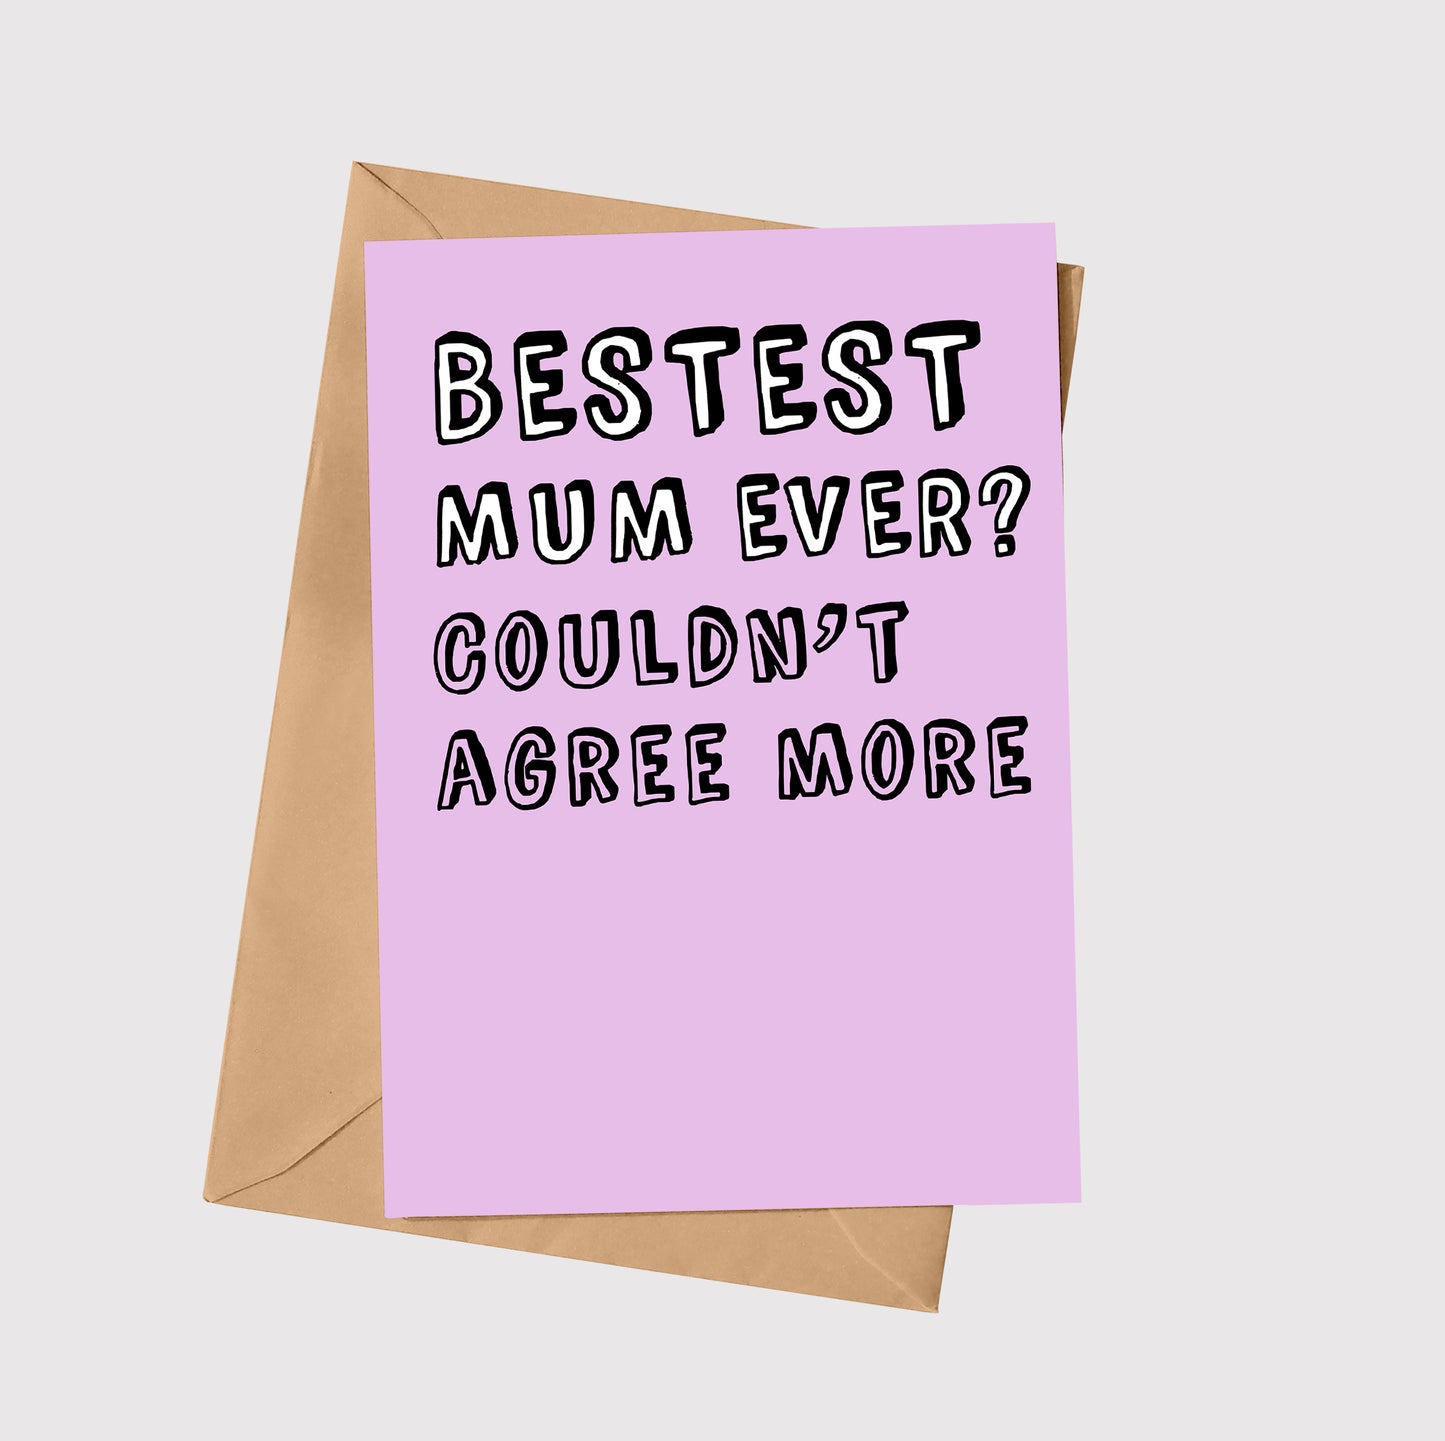 Bestest Mum Ever? Couldn't Agree More